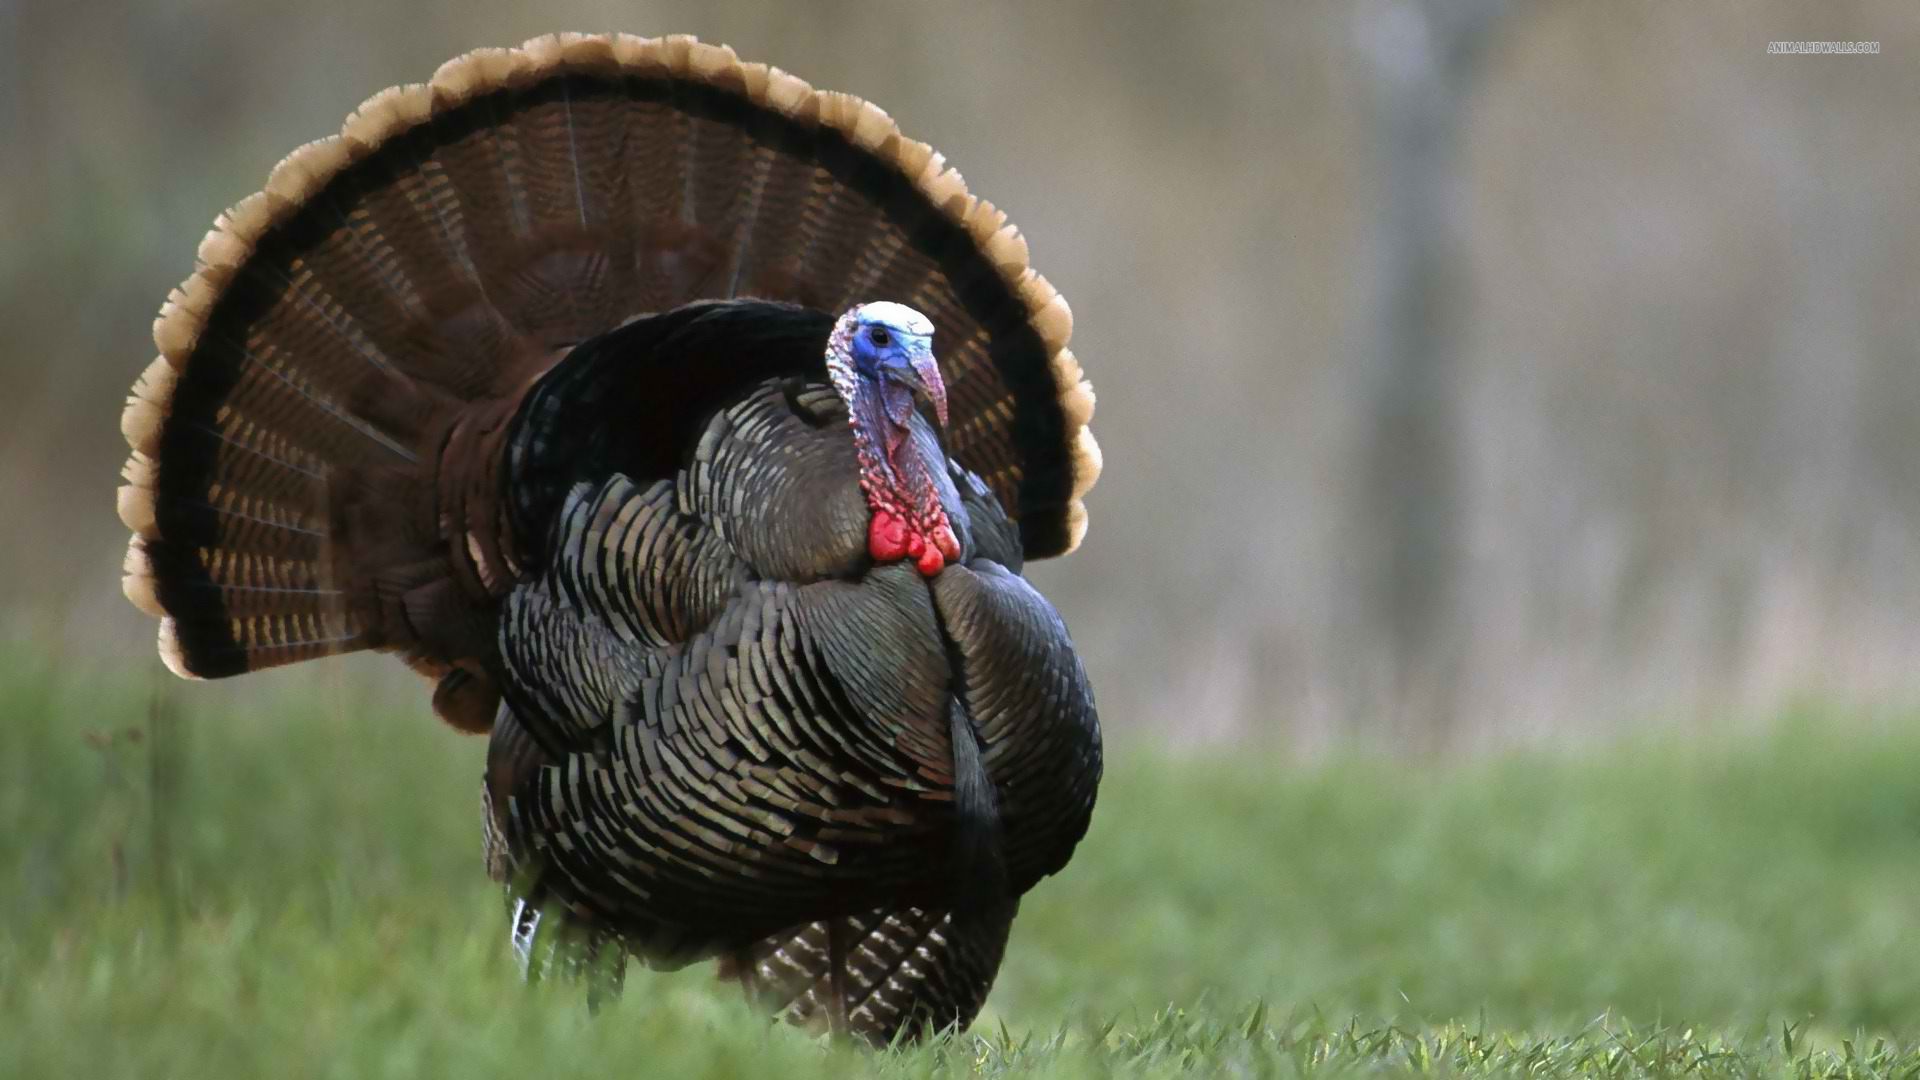 The Stratalis Group Strategic Challenges Turkeys Face